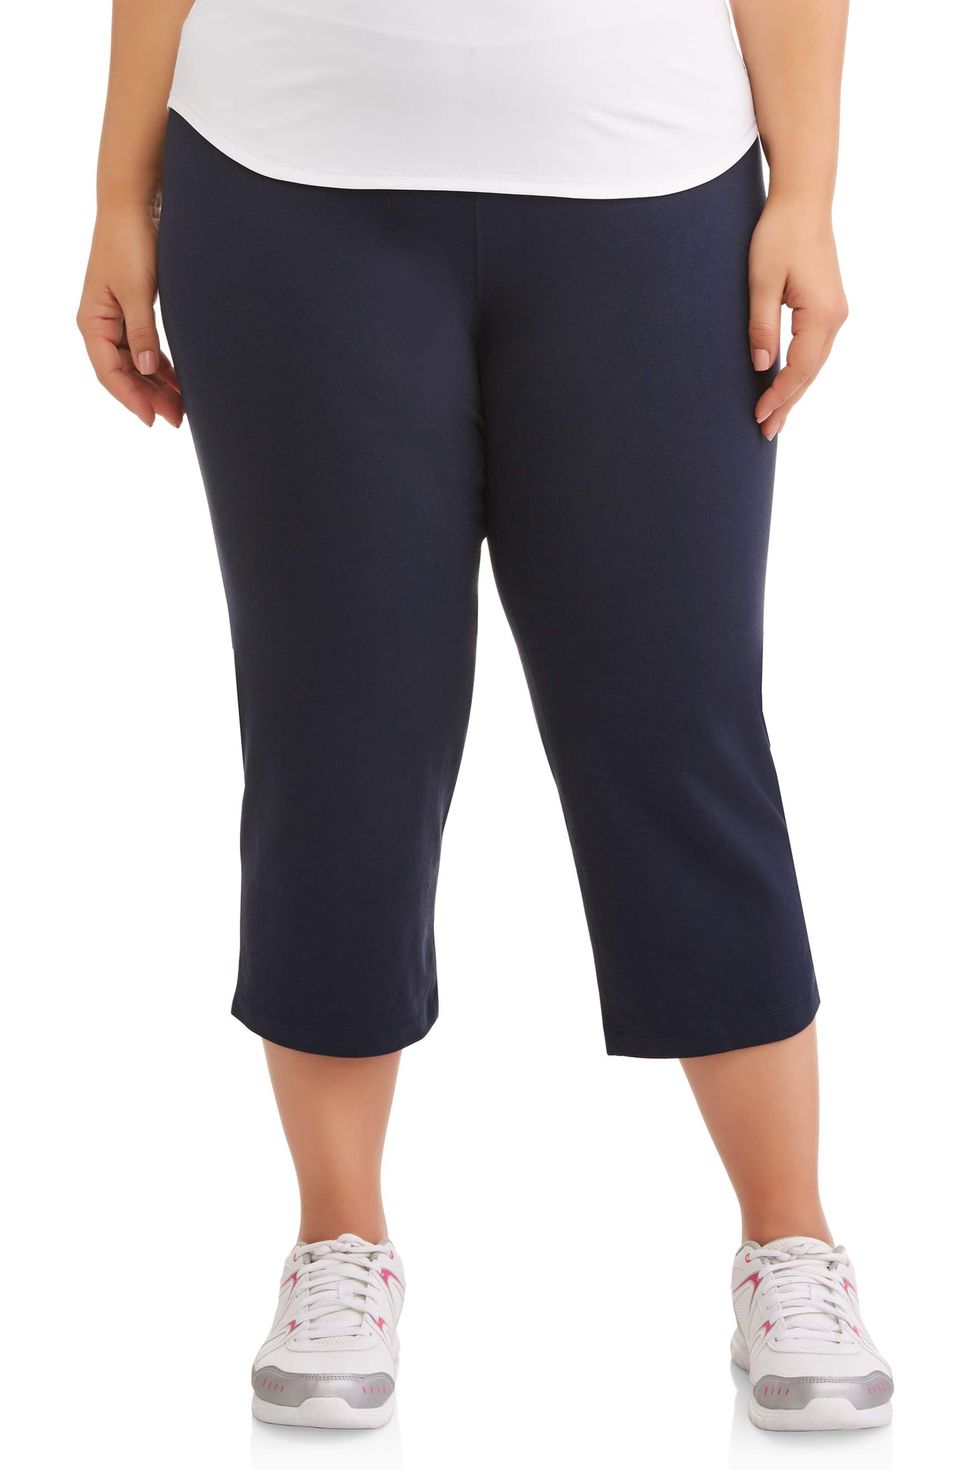 Athletic Works Women's Relaxed Fit Dri-More Core Cotton Blend Yoga